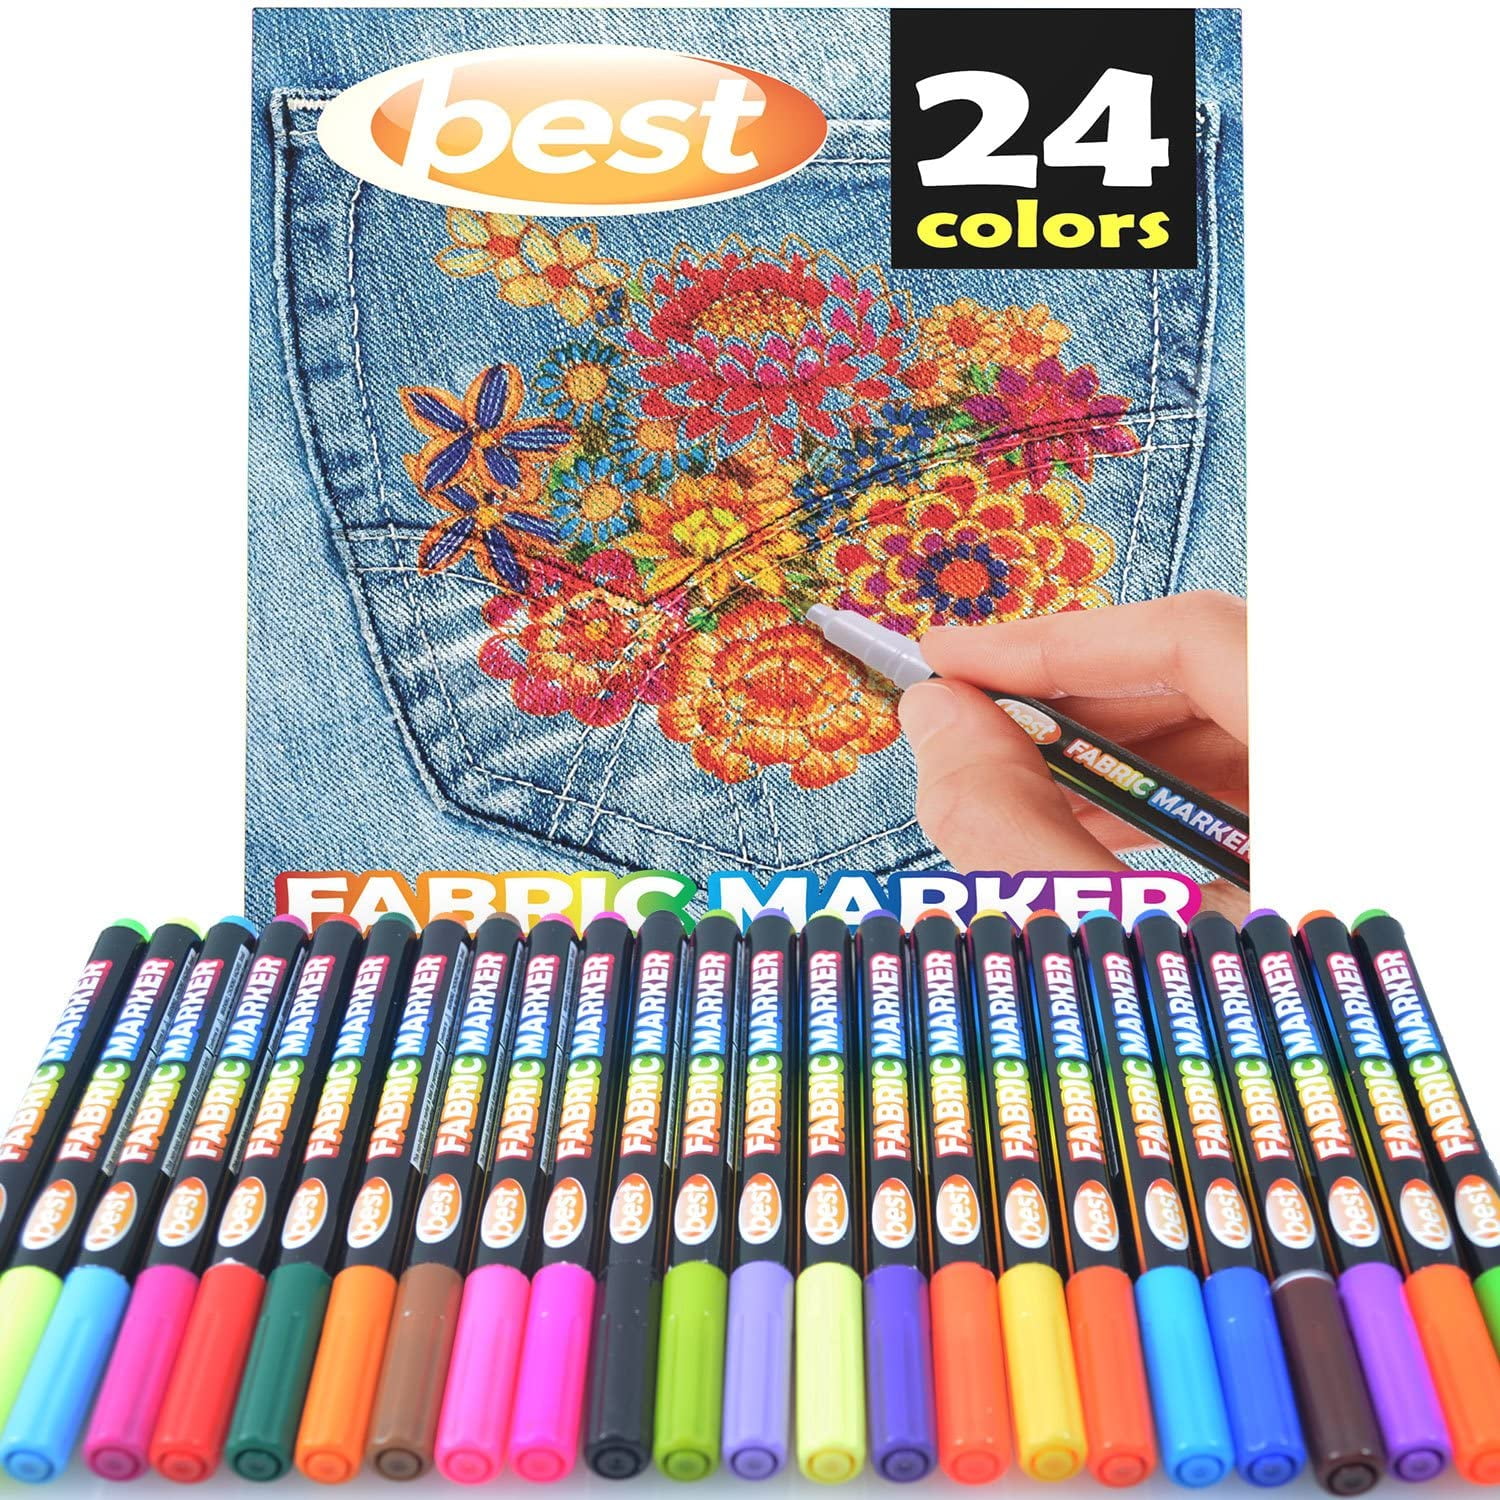 Fabric Marker RATEL 24 Colors Textile Marker No Bleed Non Toxic Fabric Pen and 